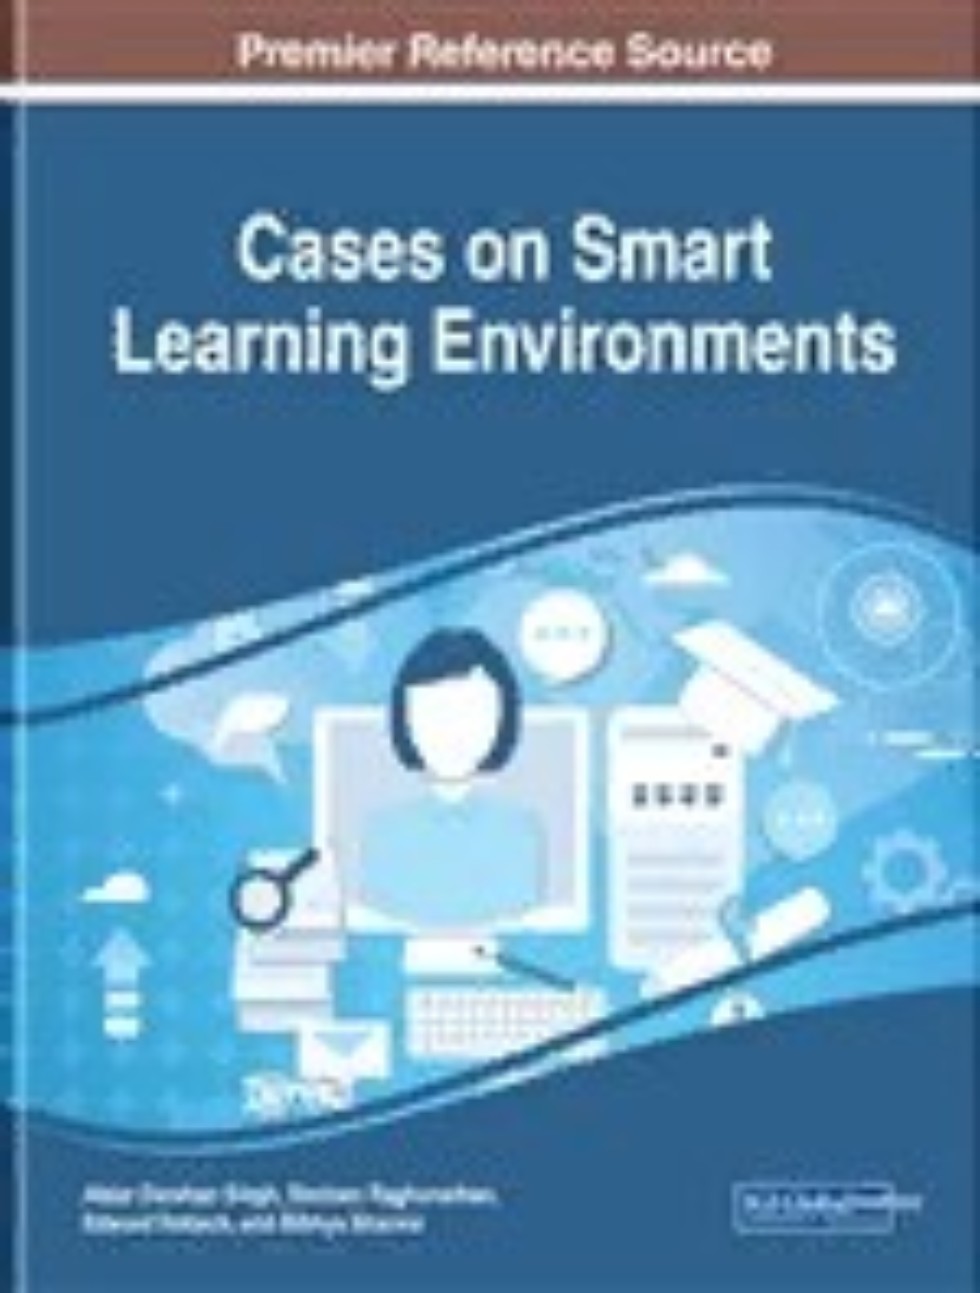     -      'Cases on Smart Learning Environments'